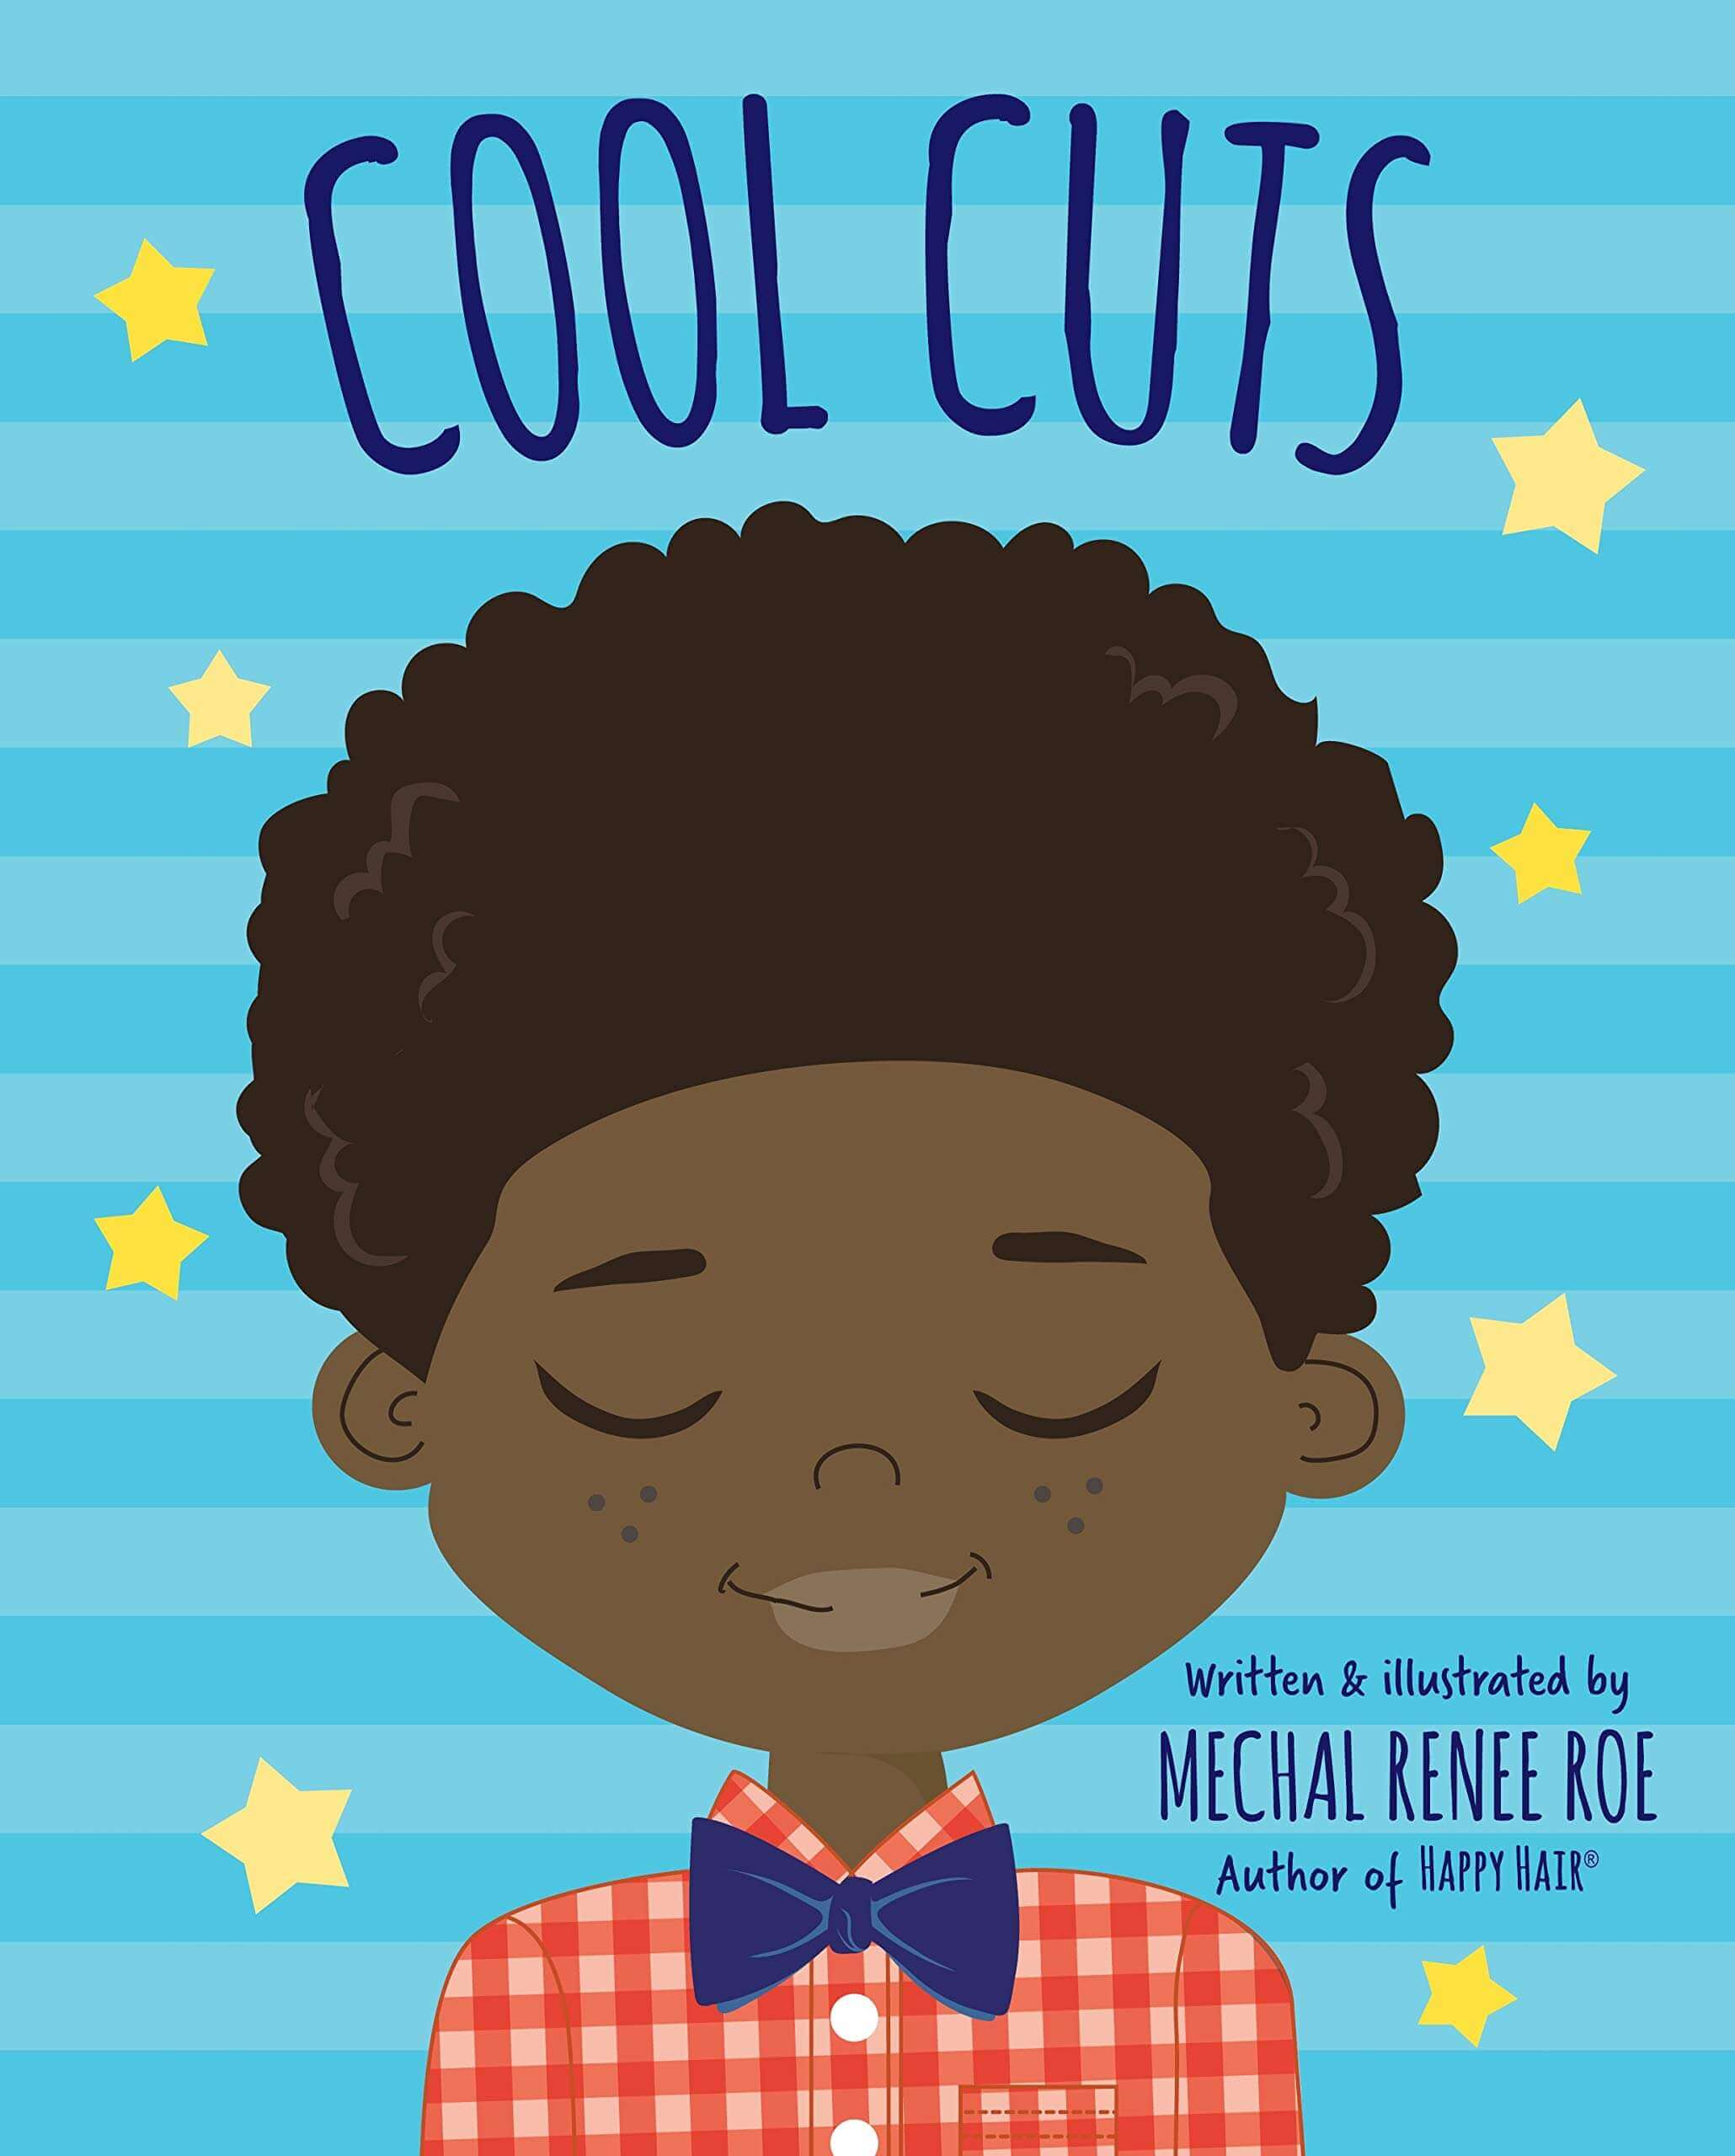 Cool Cuts Written and Illustrated by Mechal Renee Roe - Ages 3-7